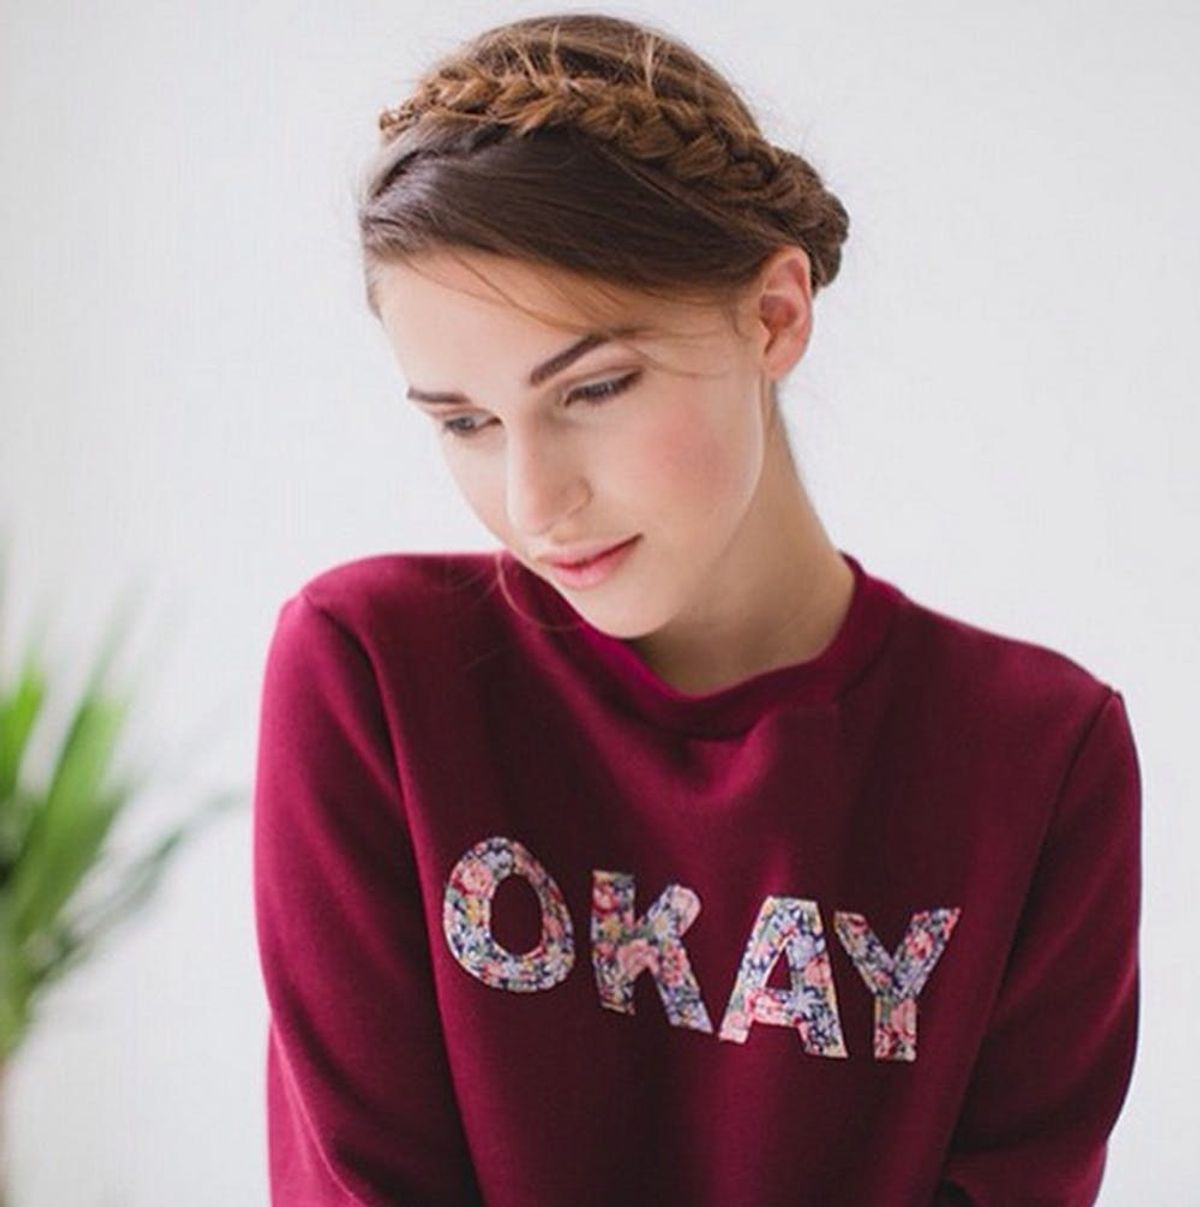 These Handmade Sweatshirts Are Your New Cozy Obsession